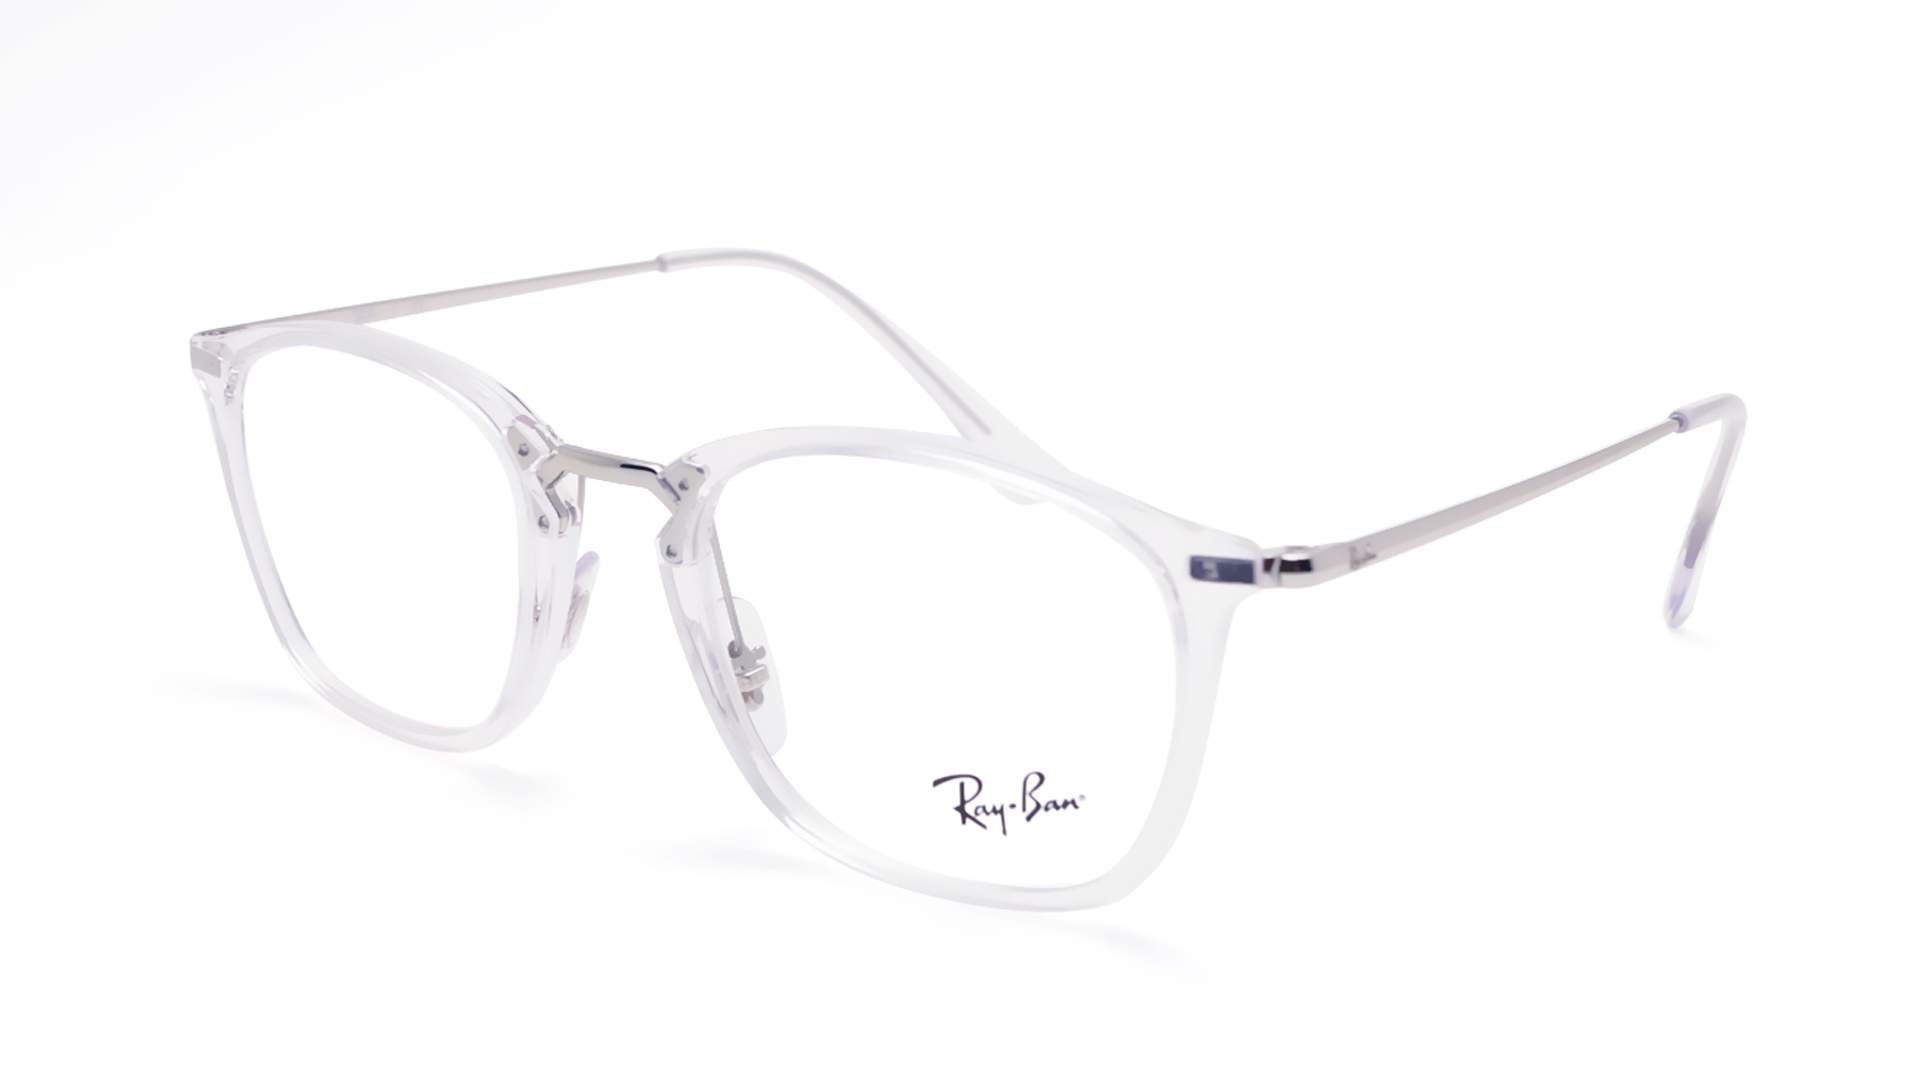 ray ban black and clear frames